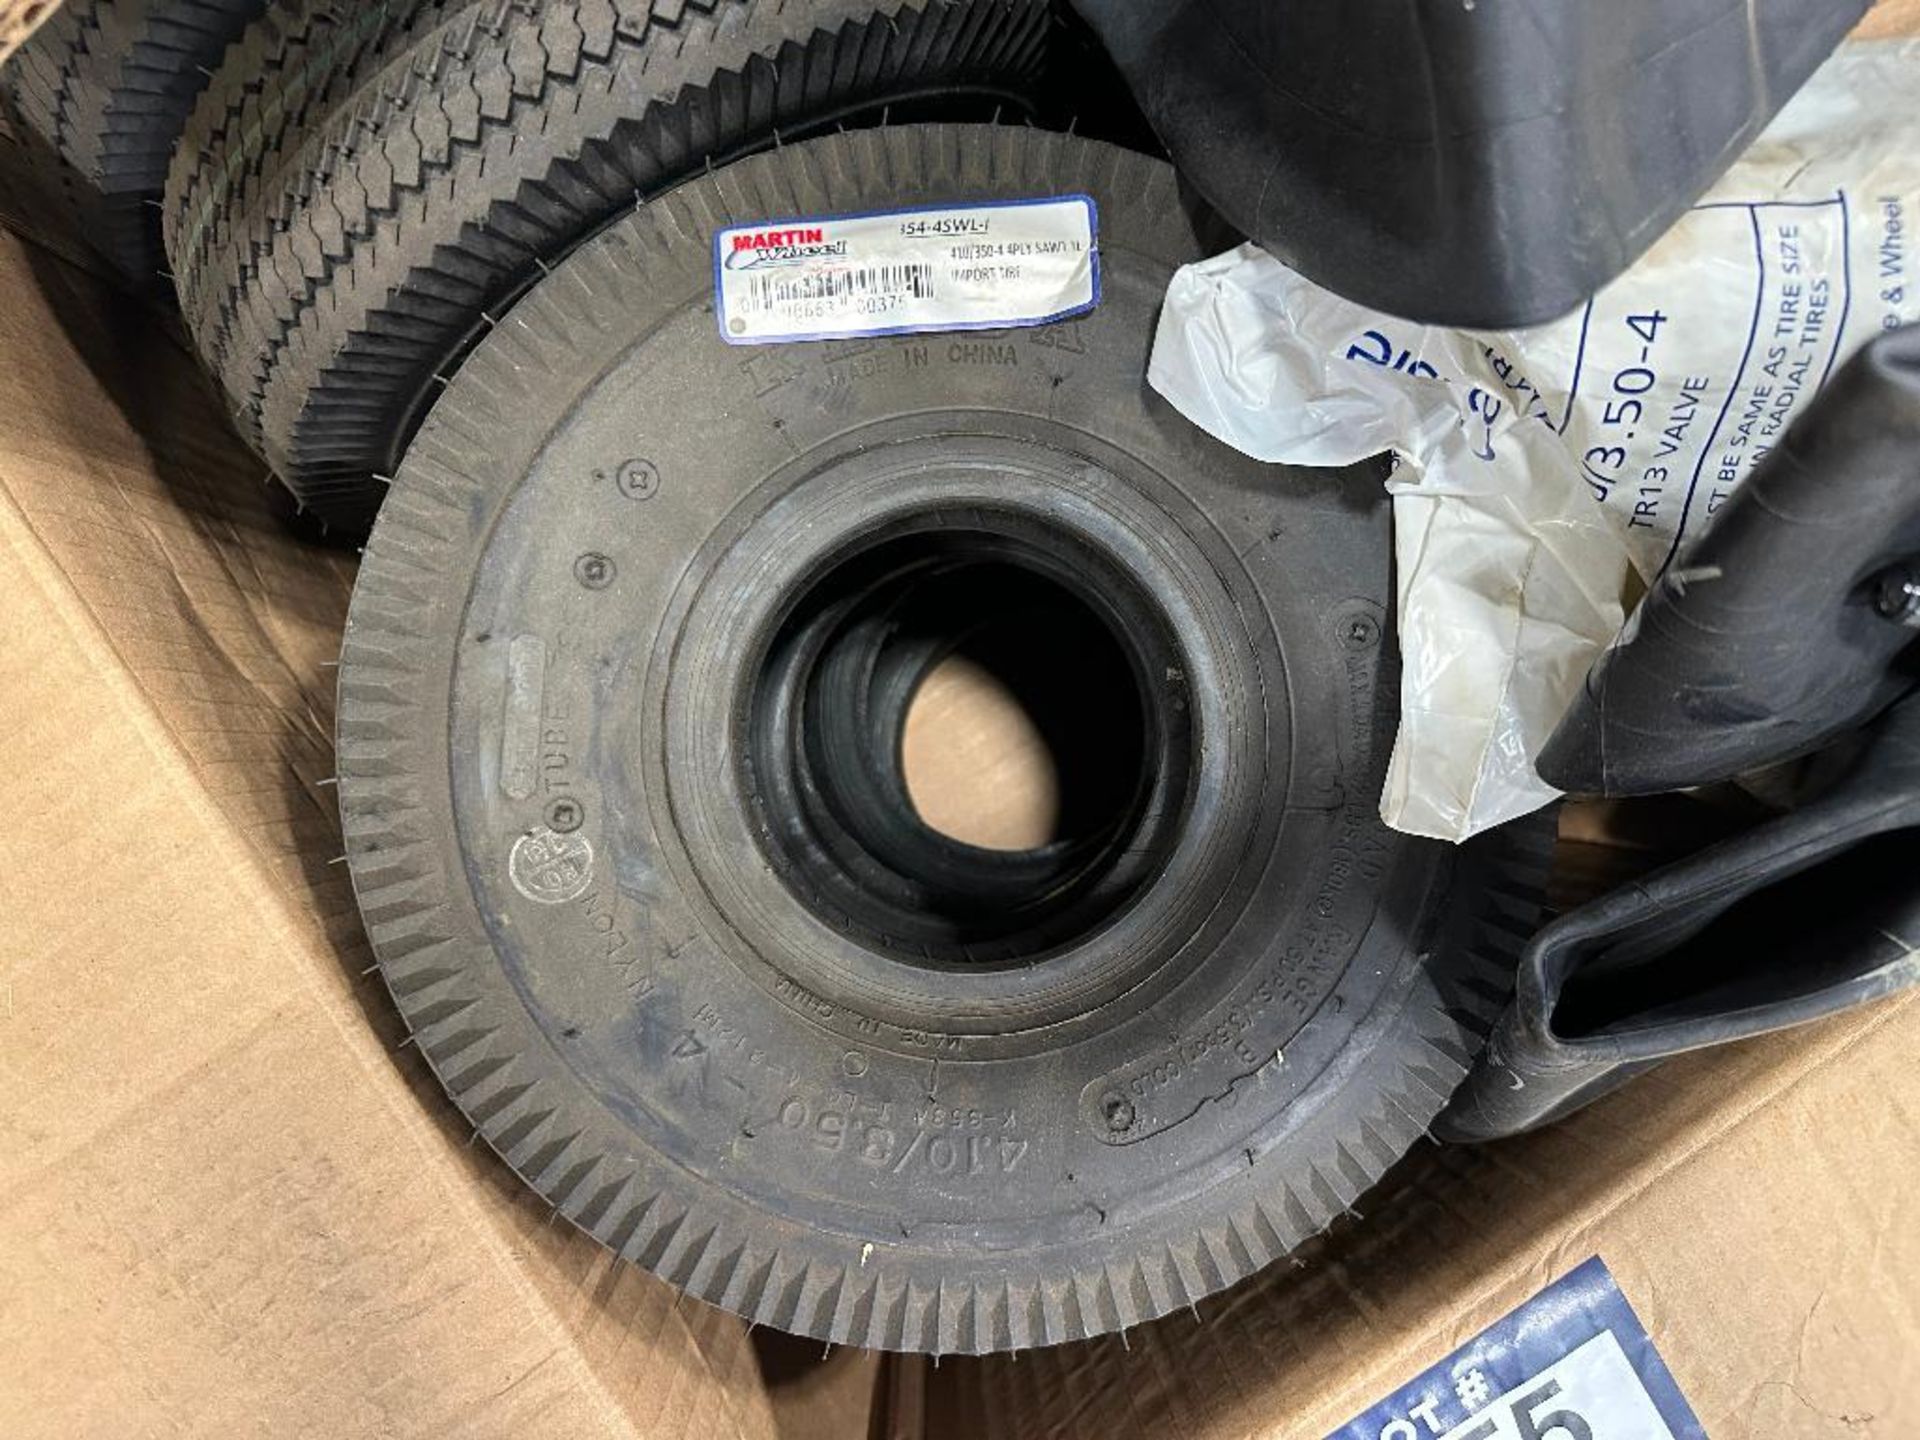 Lot of Asst. Rubber Tires, etc. - Image 4 of 5